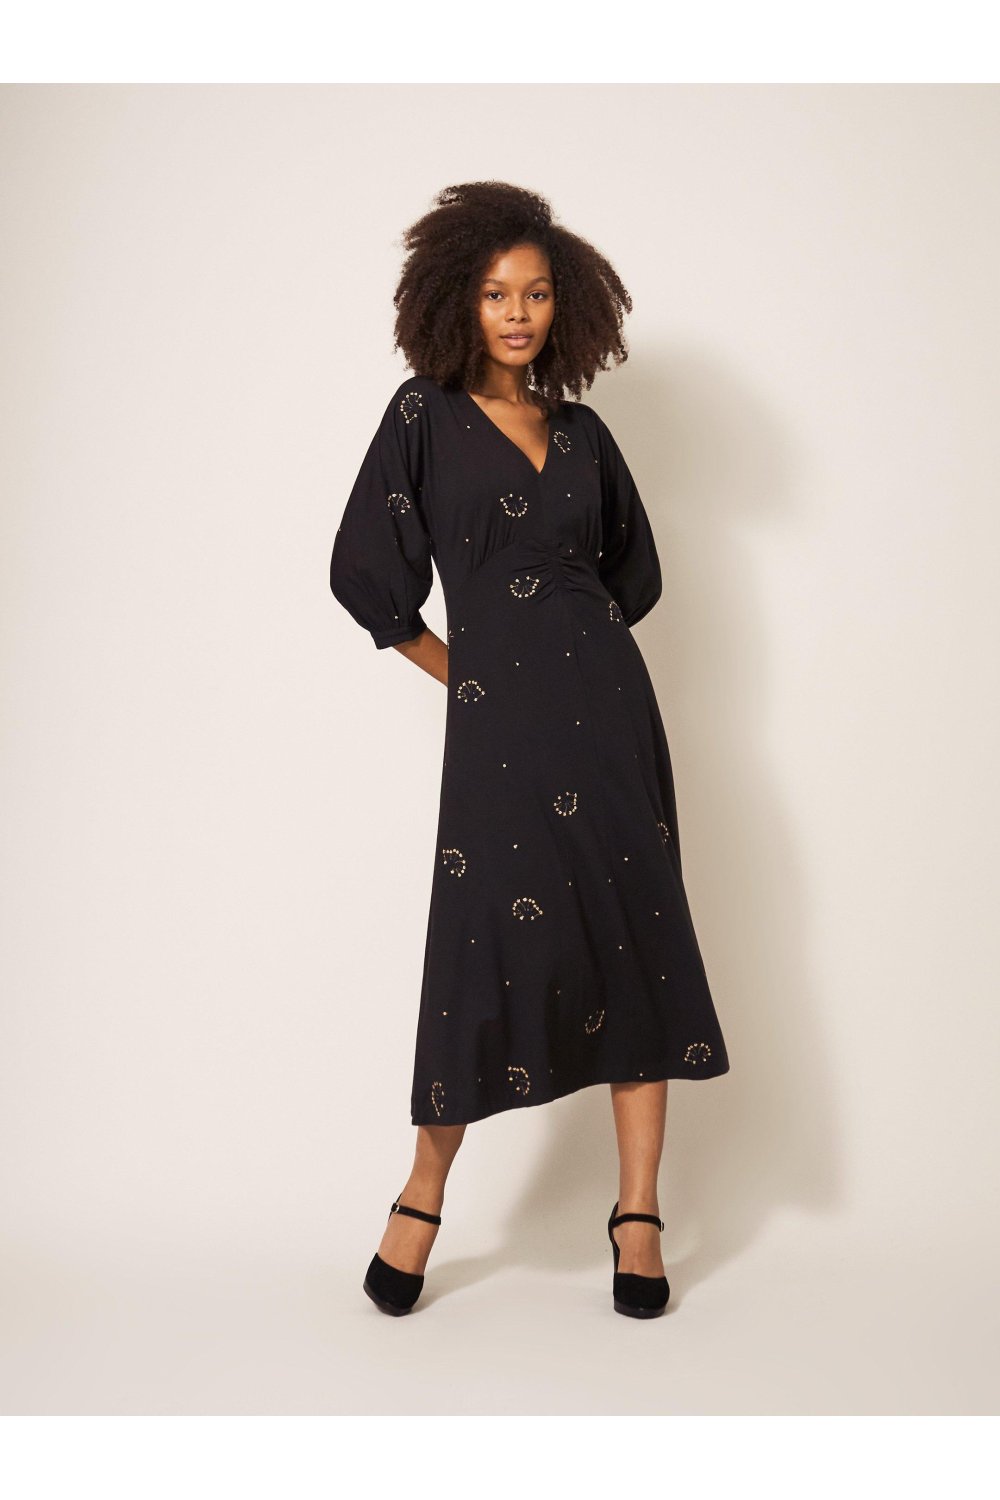 White Stuff Megan Embroidered Jersey Dress 439813 in Black